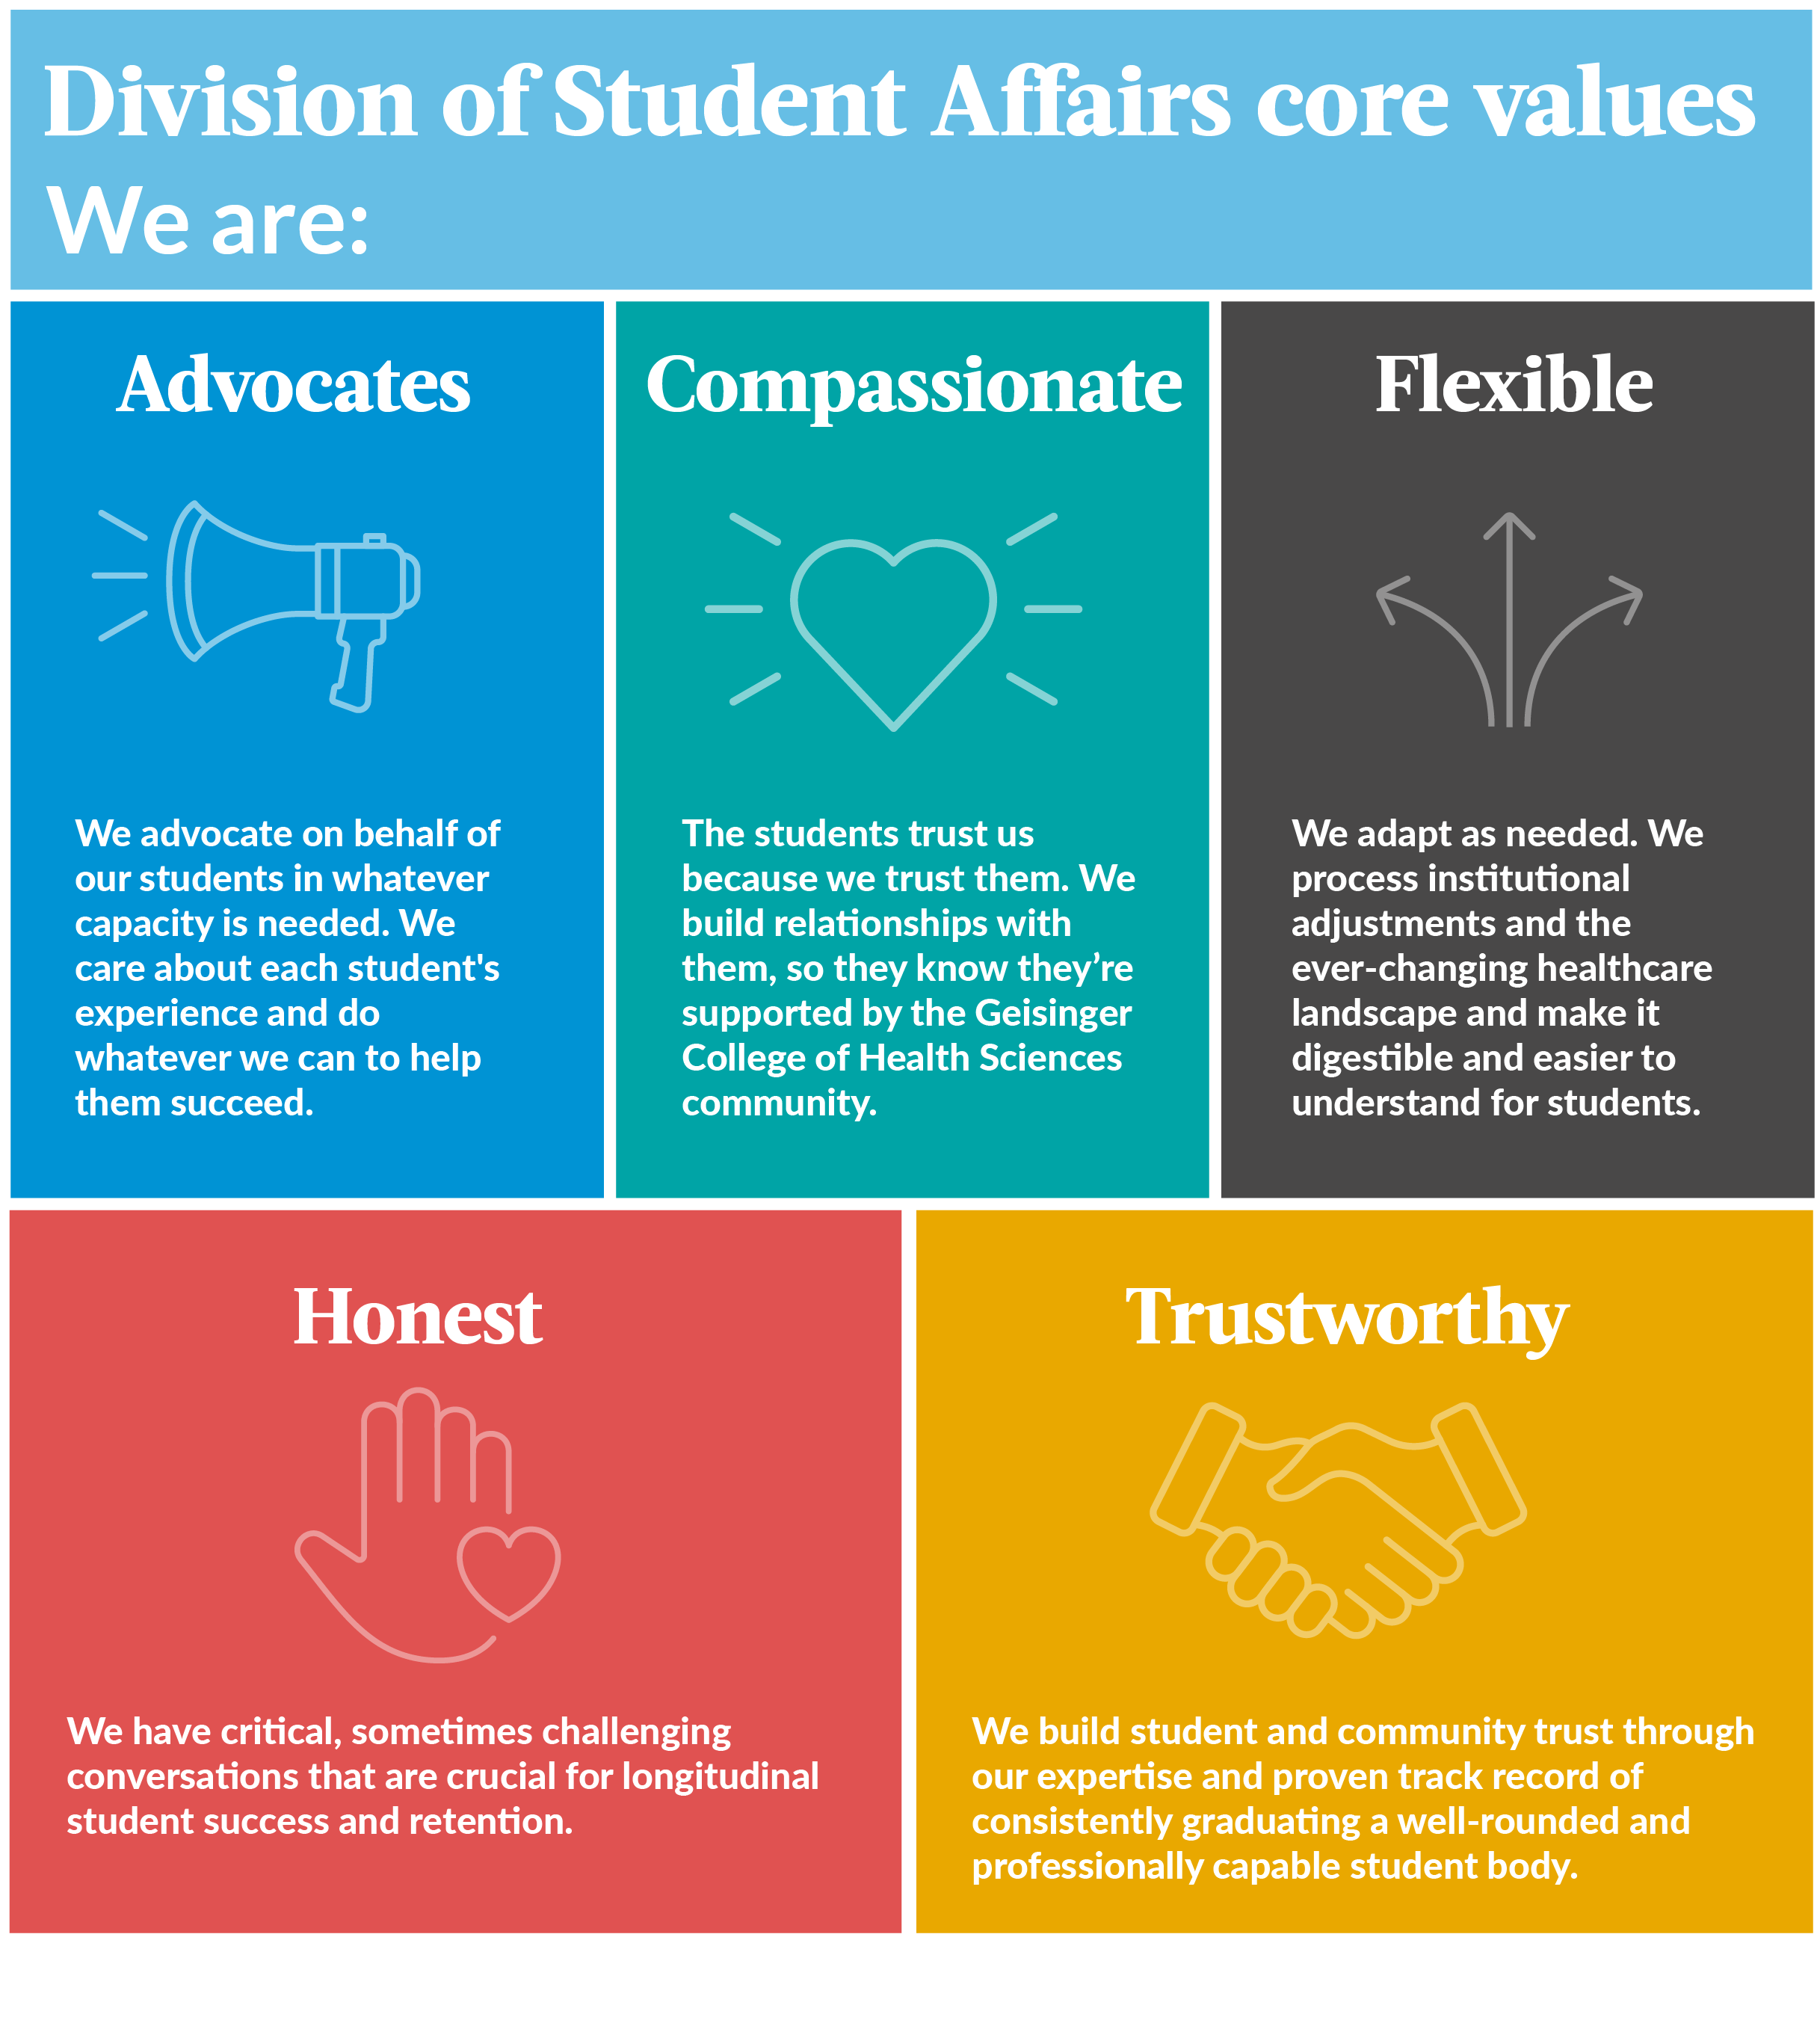 Division of Student Affairs core values